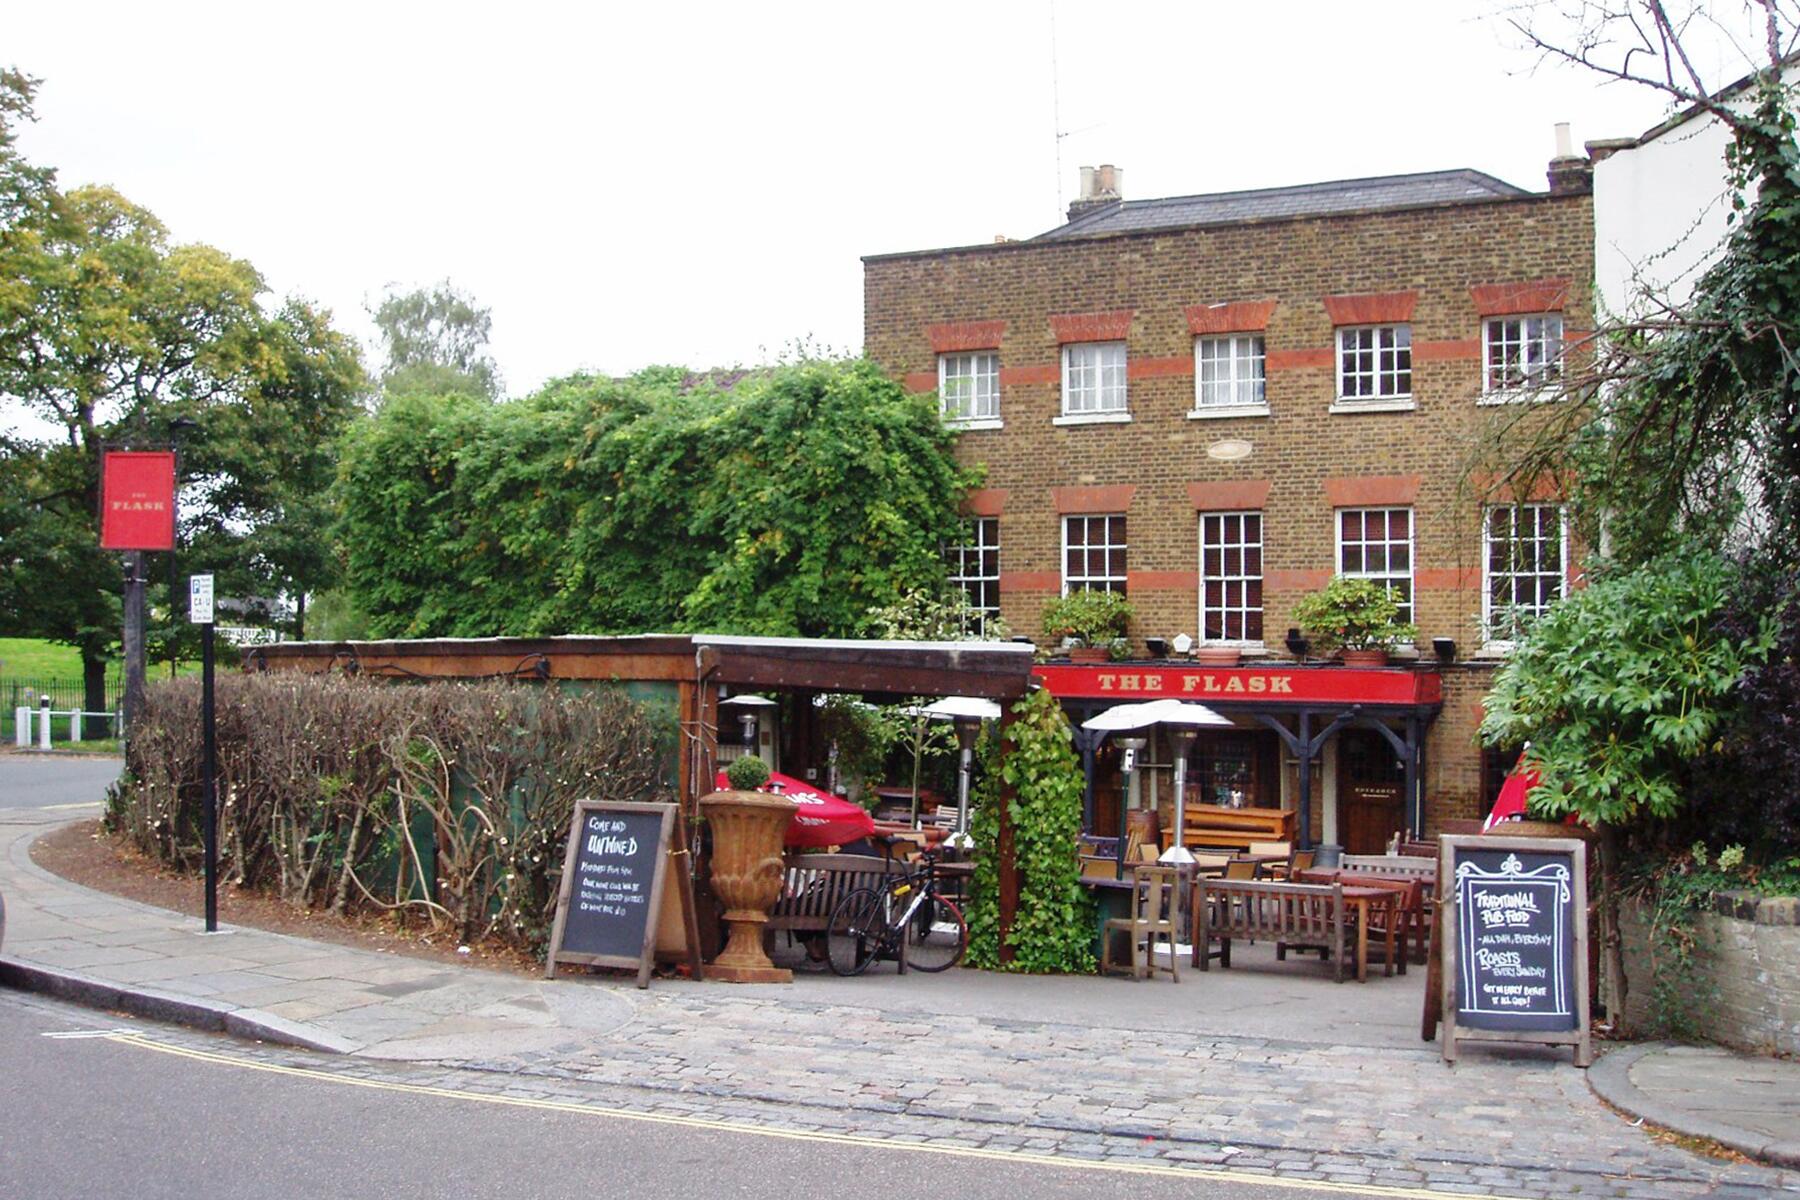 <a href='https://www.fodors.com/world/europe/england/london/experiences/news/photos/londons-best-oldest-pubs#'>From &quot;Drink Thy Fill at 12 of London’s Oldest Pubs: The Flask&quot;</a>